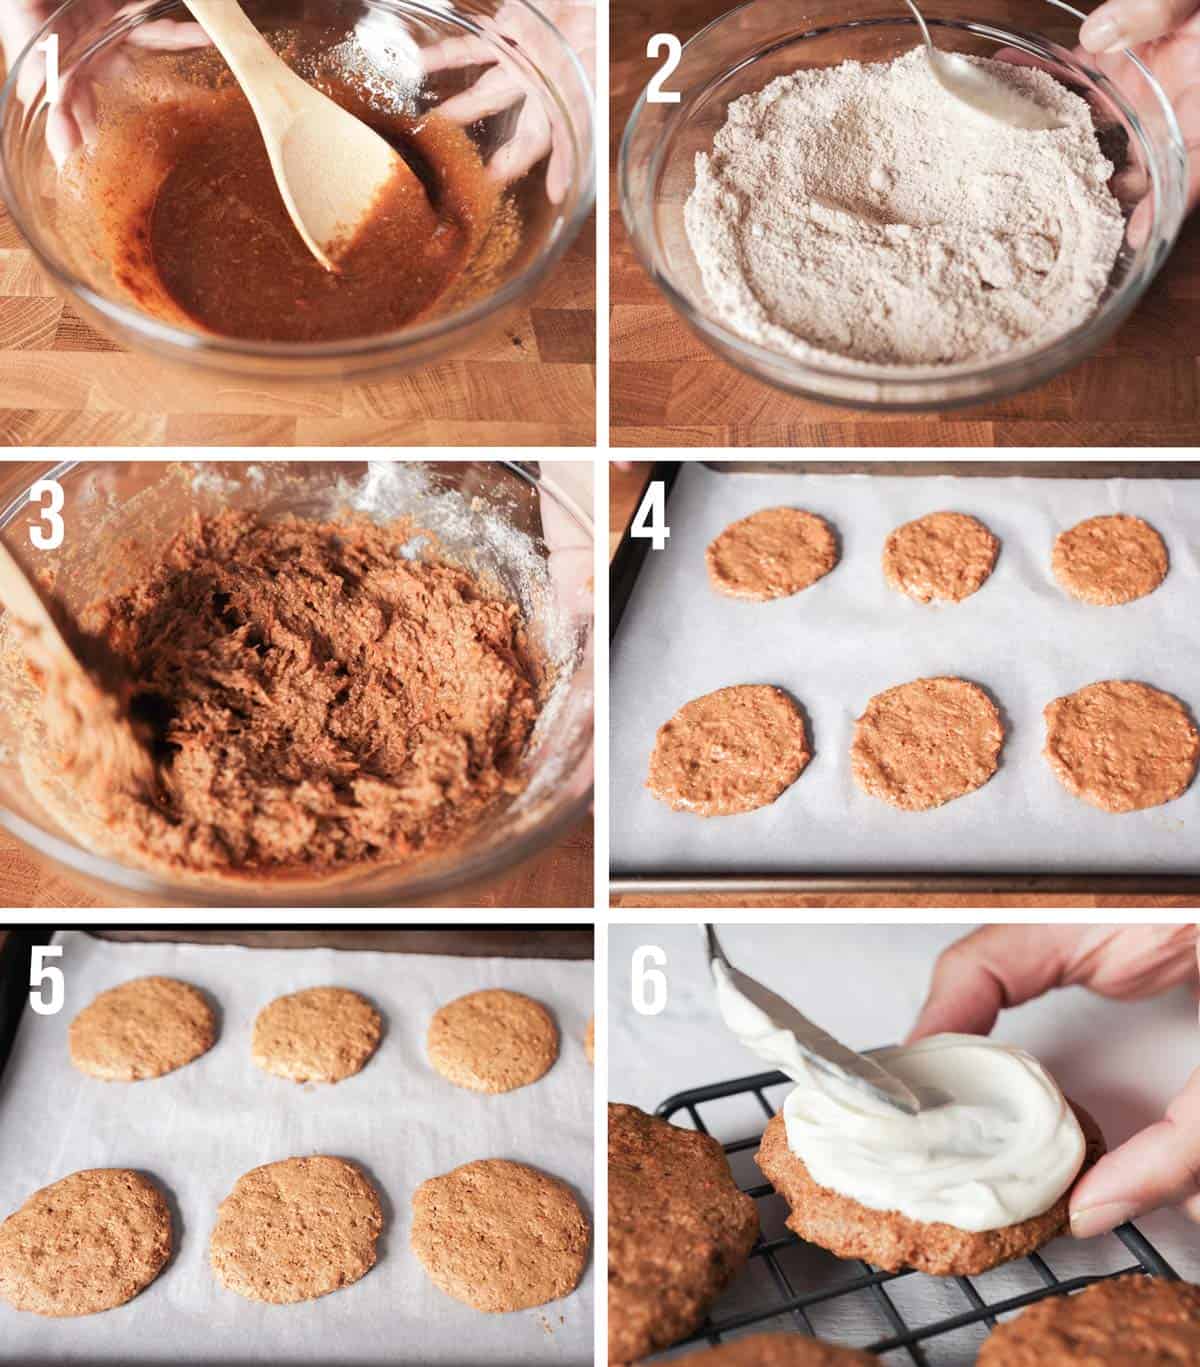 Process of how to make healthy carrot cake cookies.